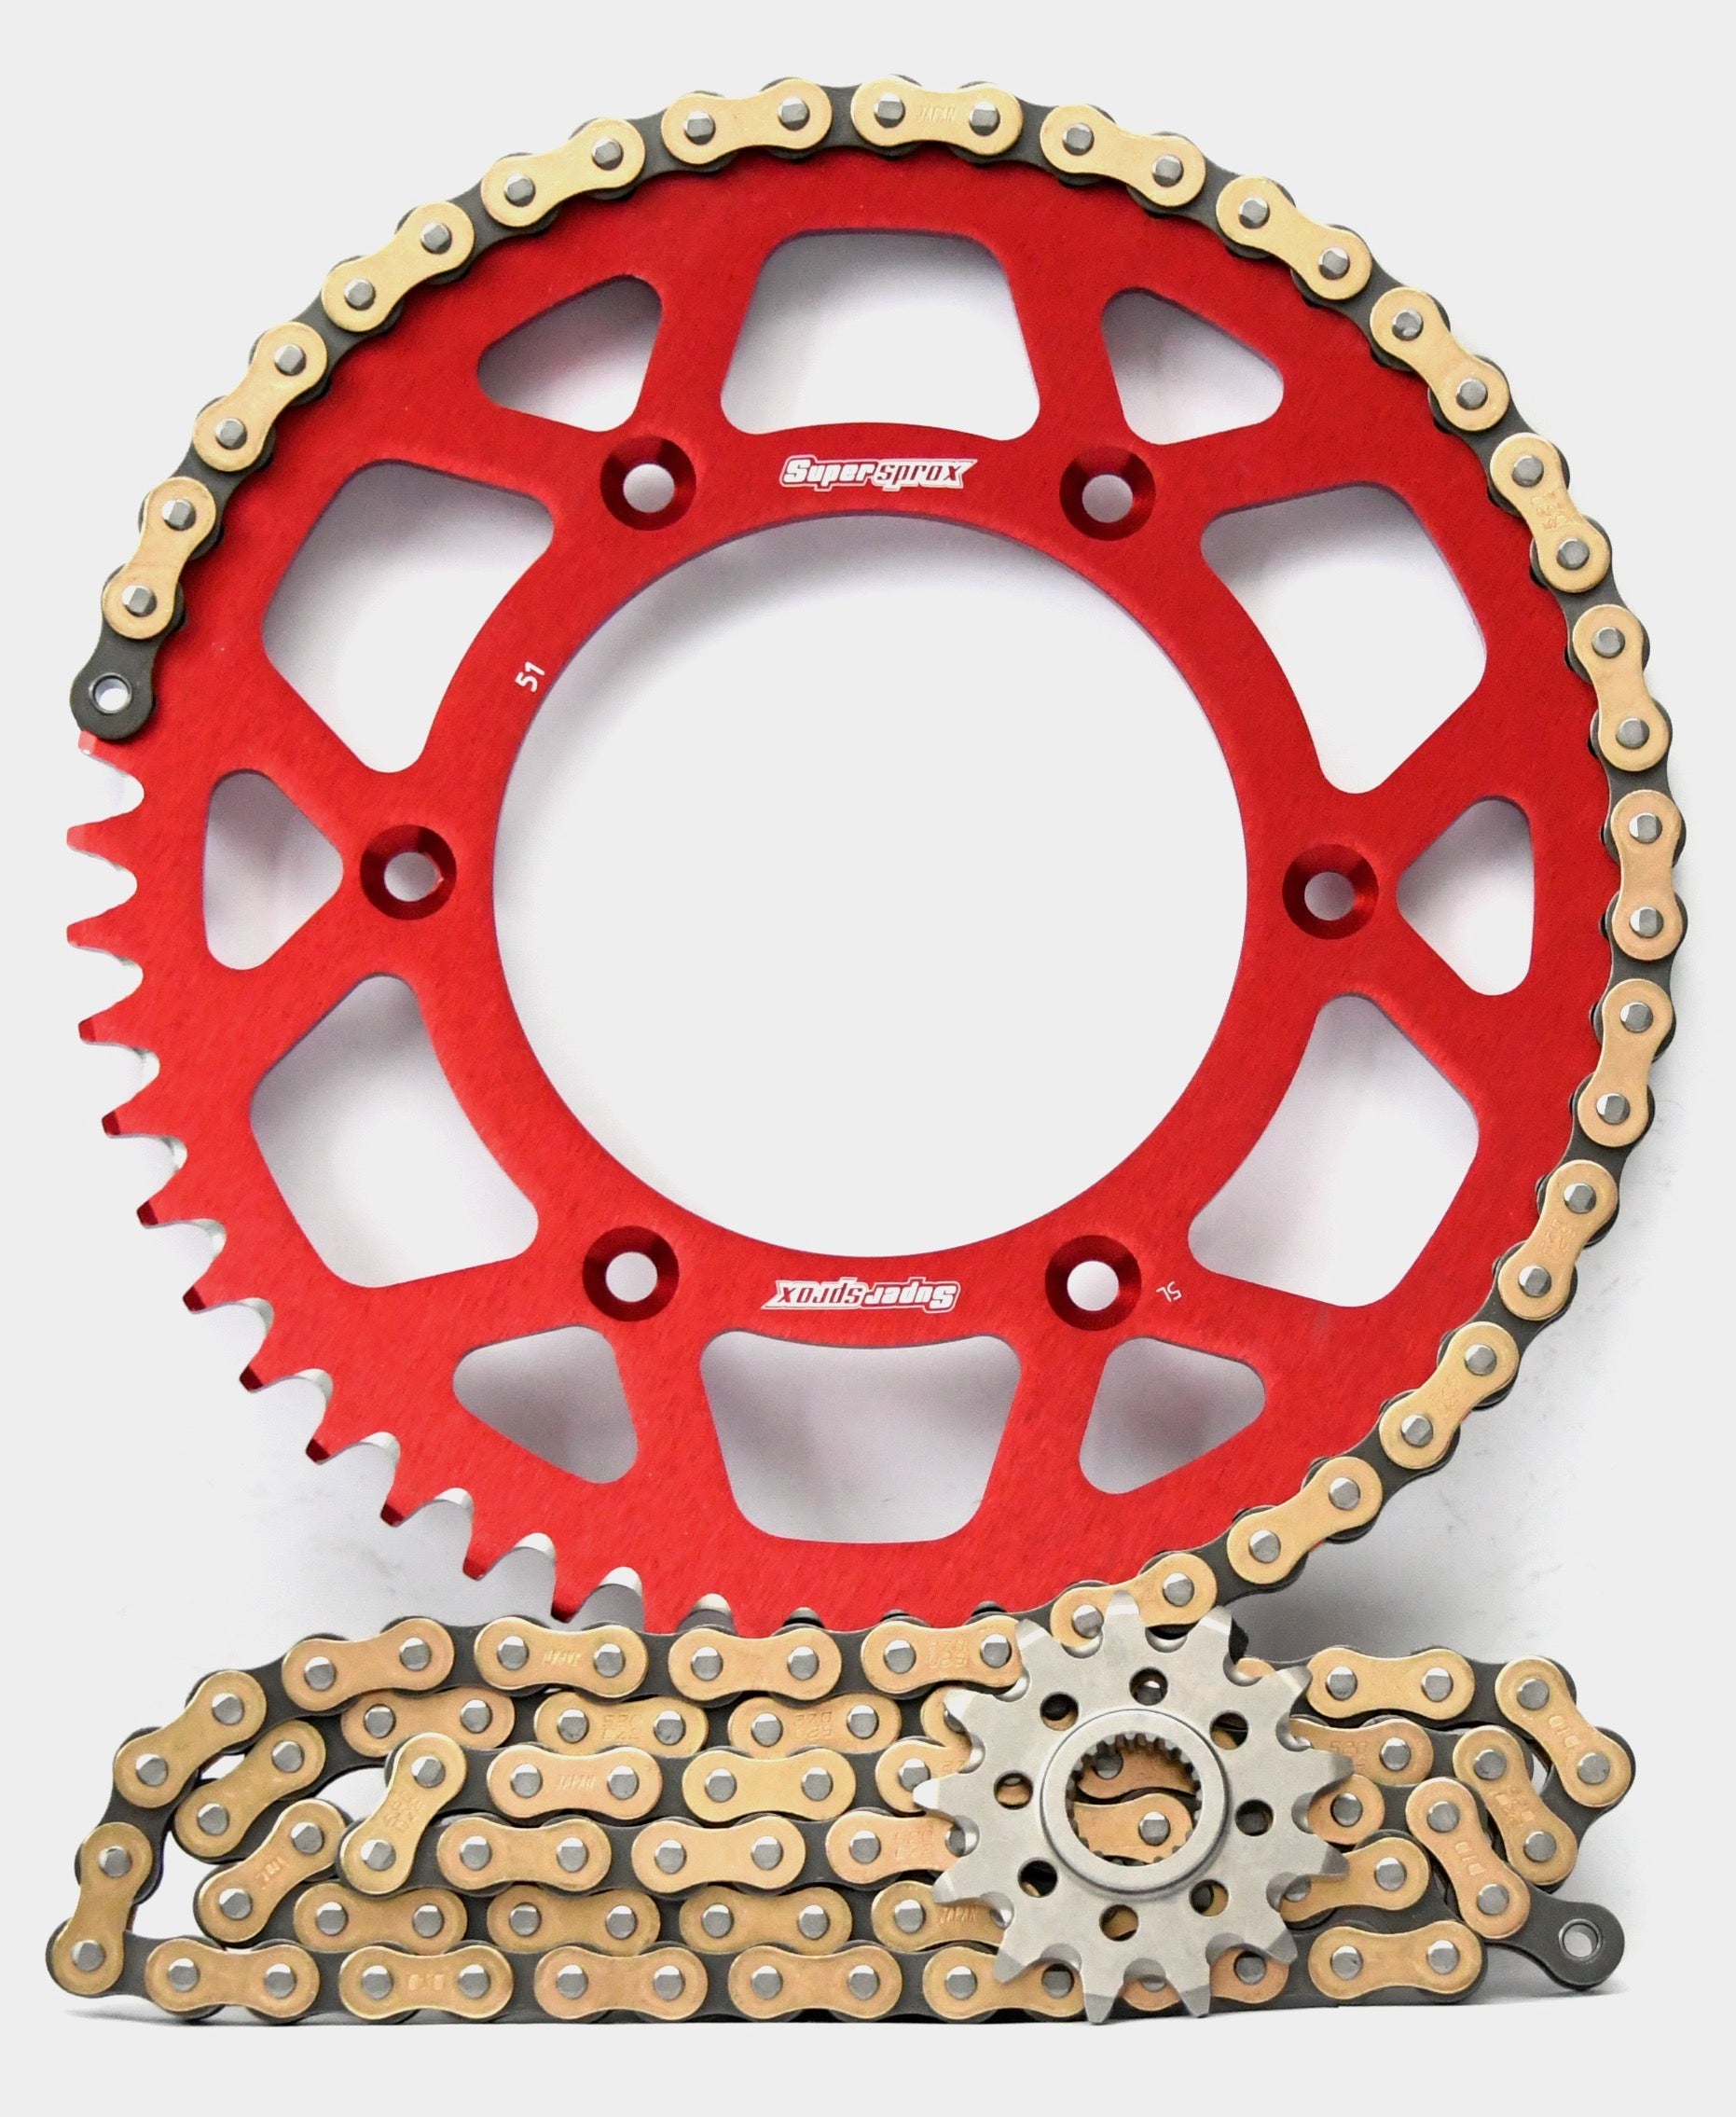 Supersprox Chain & Aluminium Sprocket Kit for Honda CRF250R 2004-2017 - Choose Your Gearing - 0